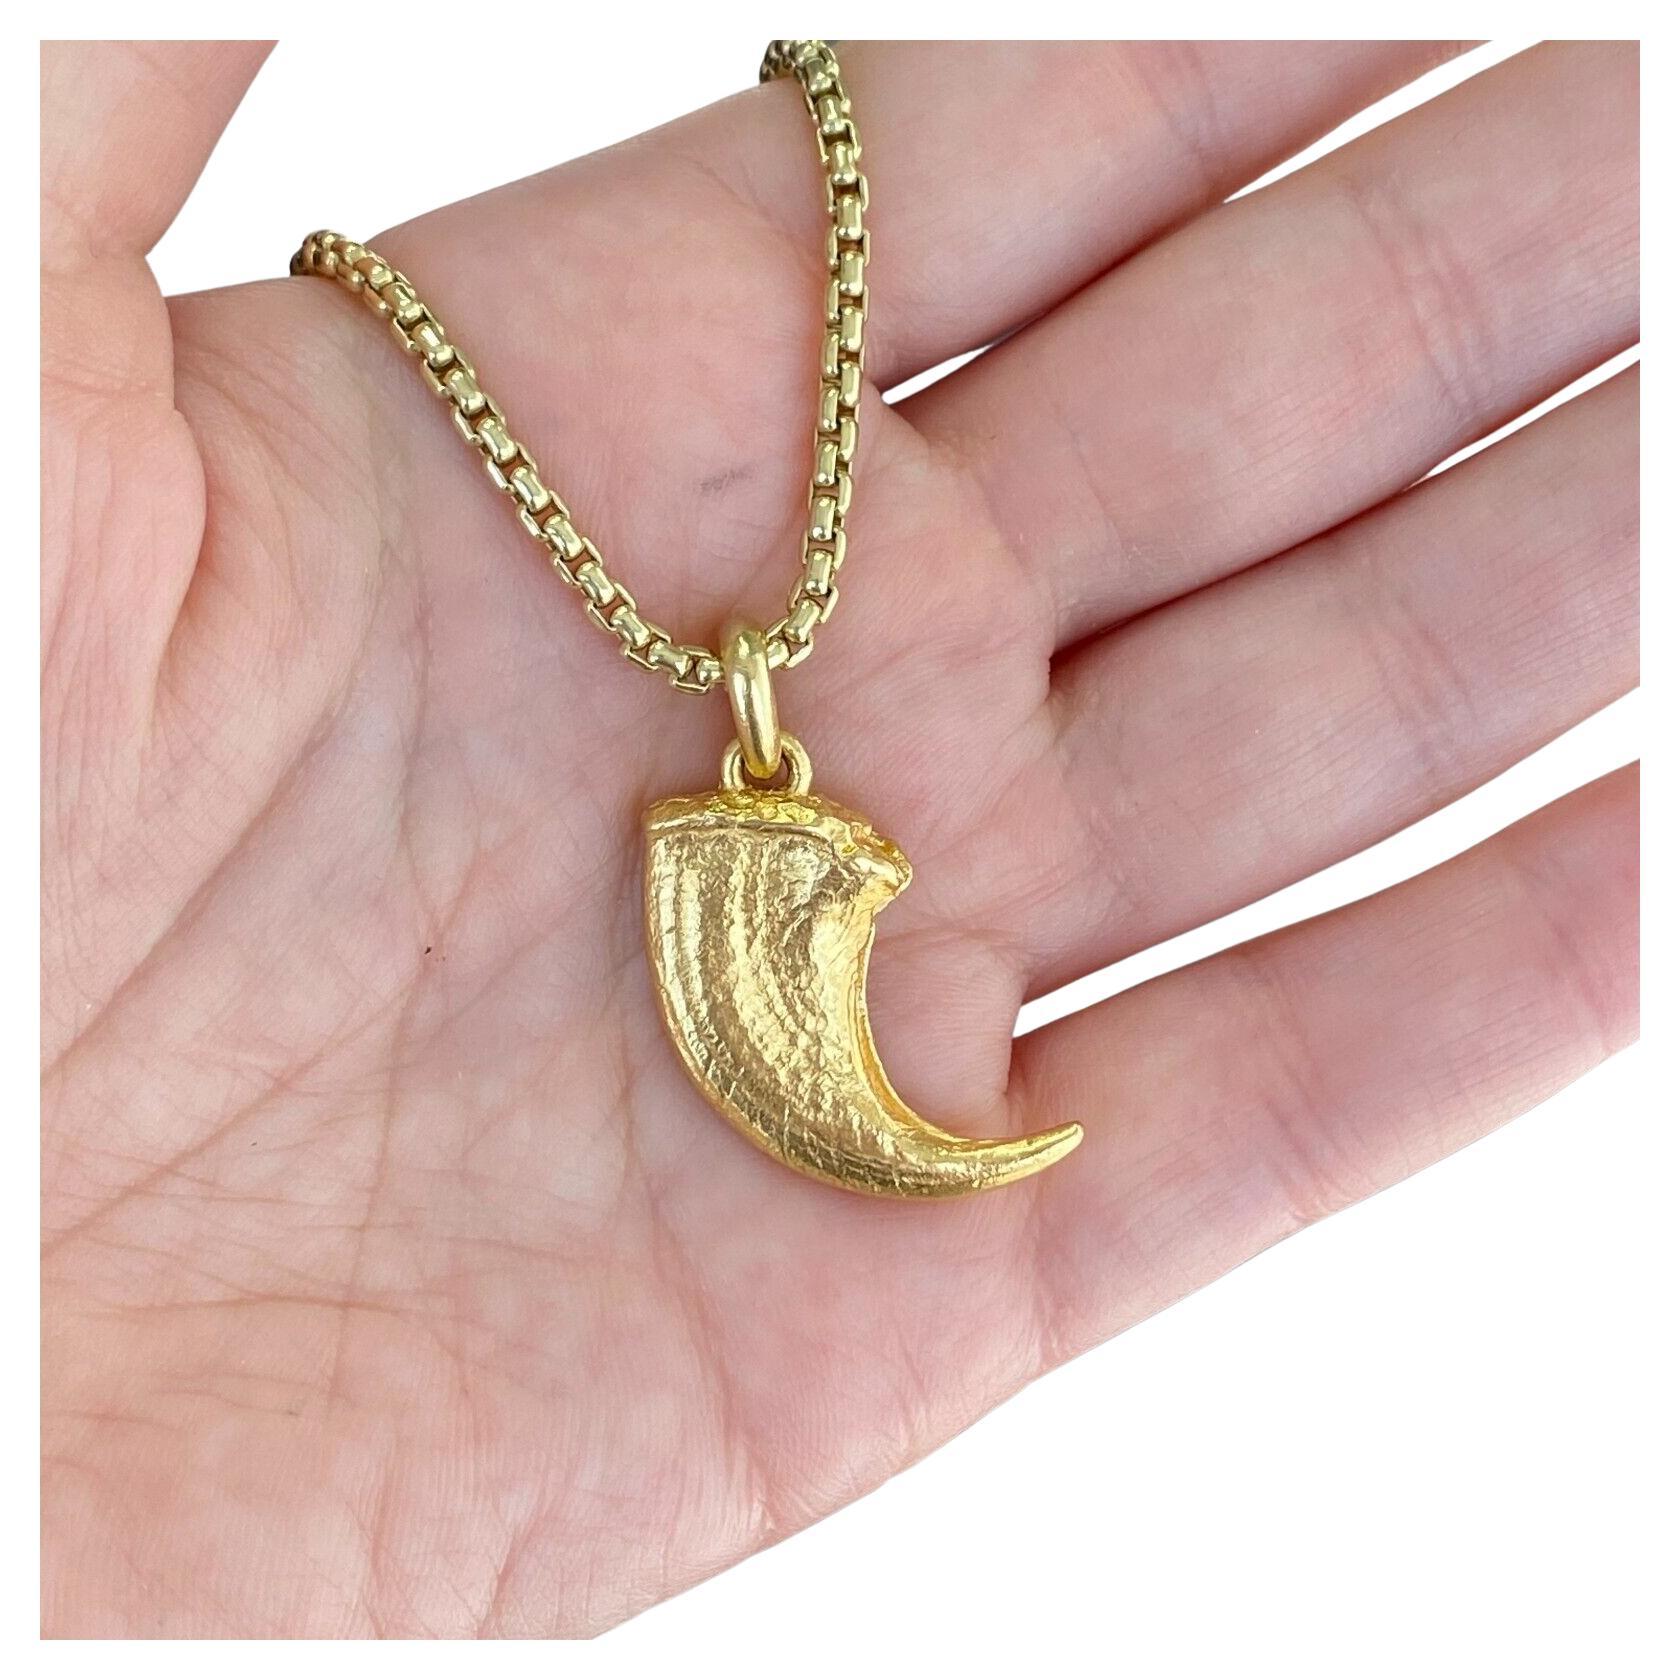 Seller Notes:“IN GREAT CONDITION; PENDANT IS 22K SOLID GOLD & CHAIN IS 18K GOLD.”
Brand:David Yurman
Department:Men
Type:Necklace
Metal Purity:18-22K
Closure:Lobster
Color:Yellow
Style:Chain
Base Metal:Gold
Item Length:25 in
Metal:Yellow Gold
Chain